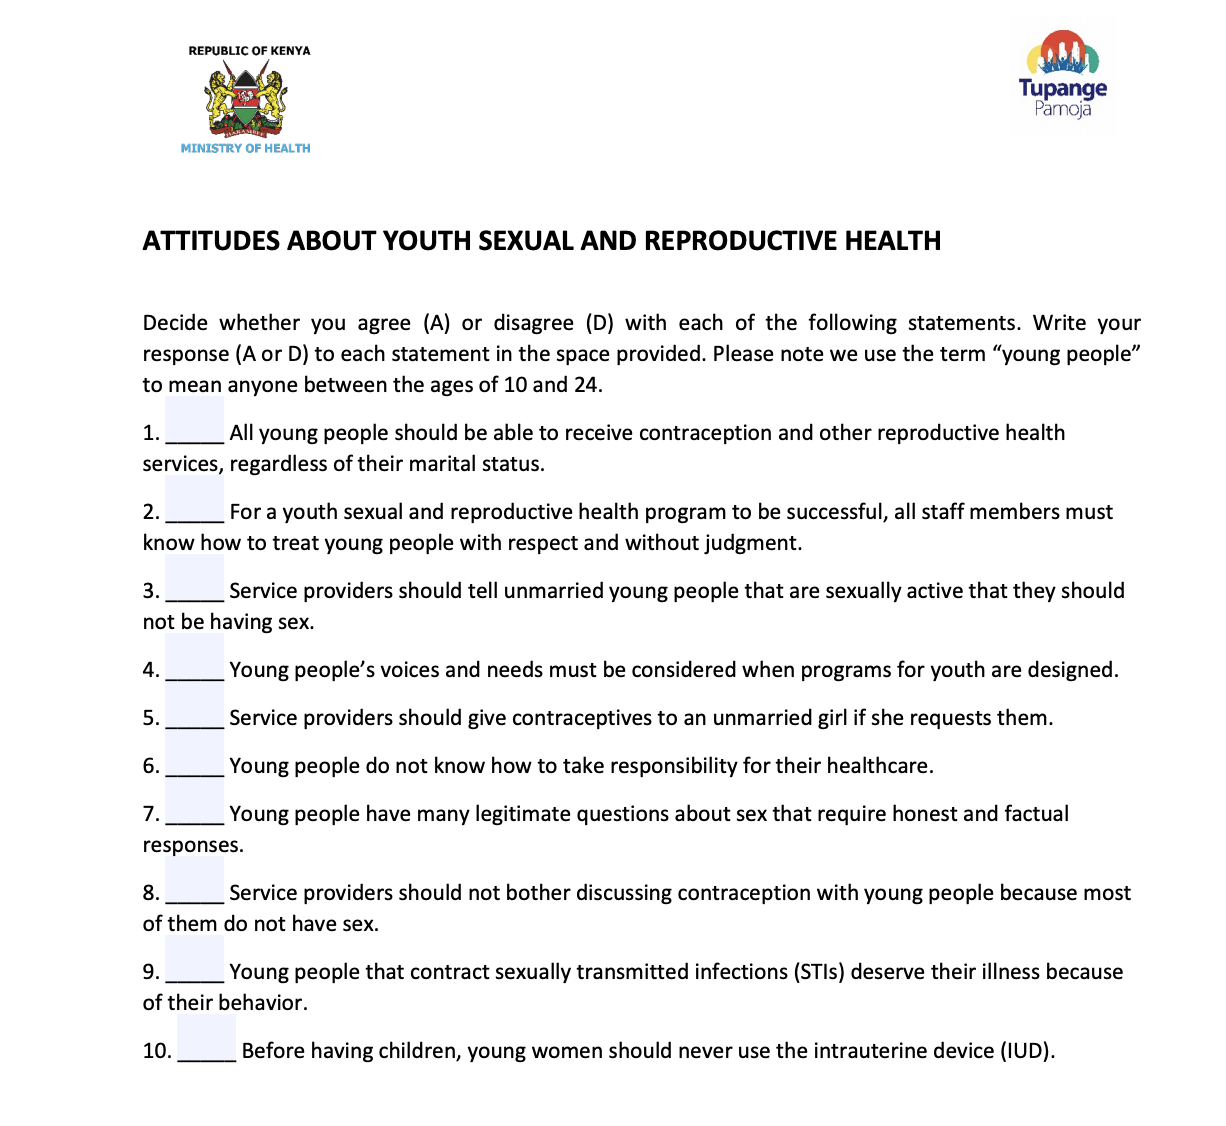 Attitudes About Youth Sexual and Reproductive Health